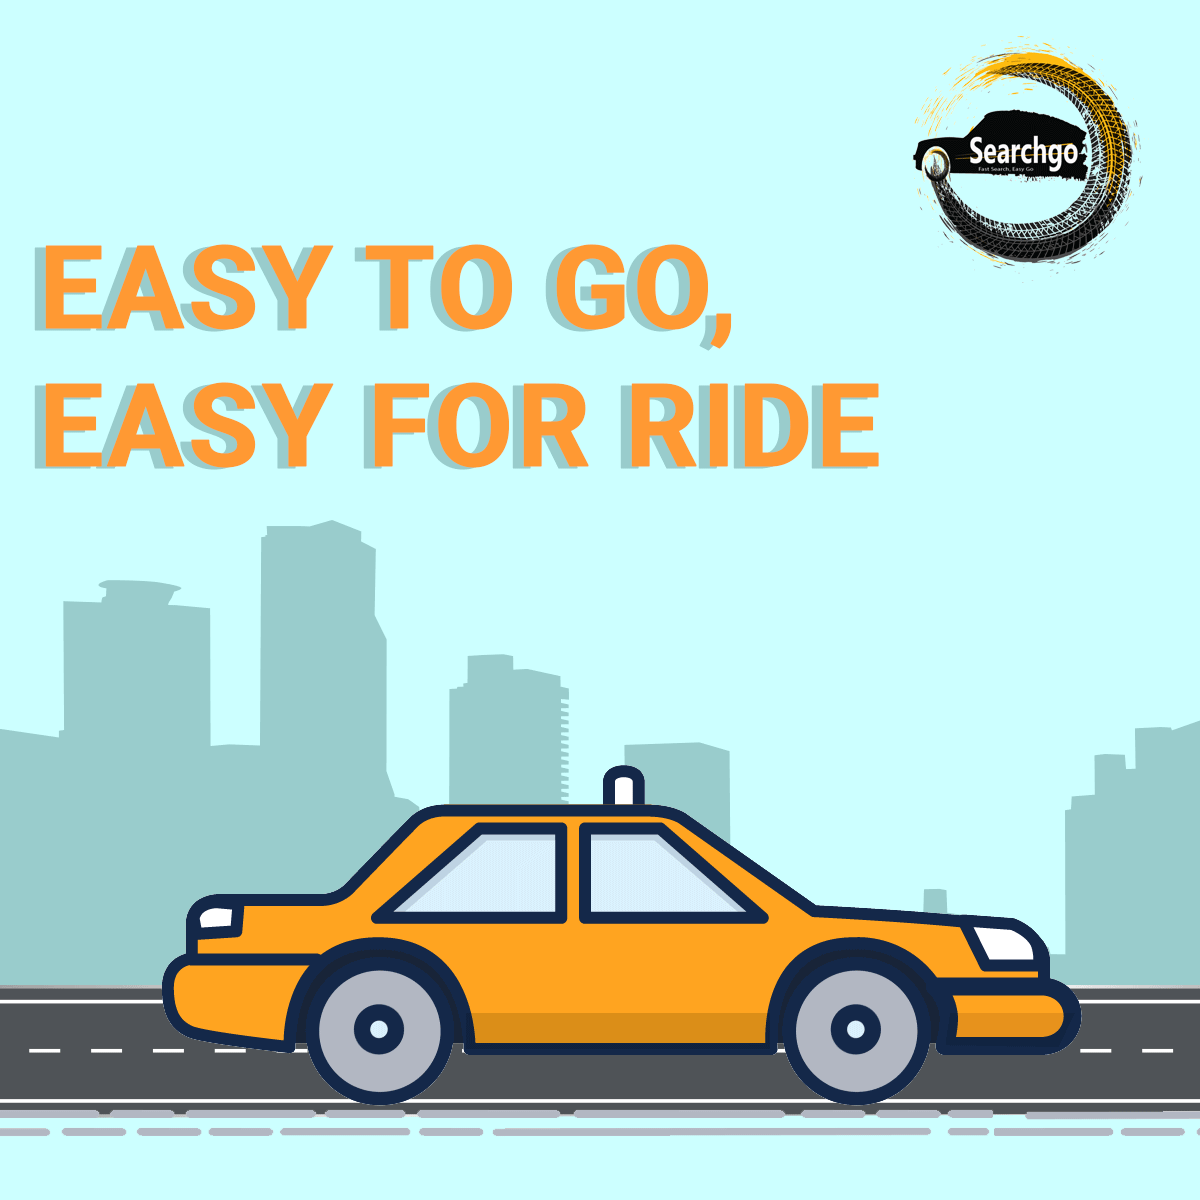 Ride with Search Go Airport Taxi & get Cashback, Book Now!